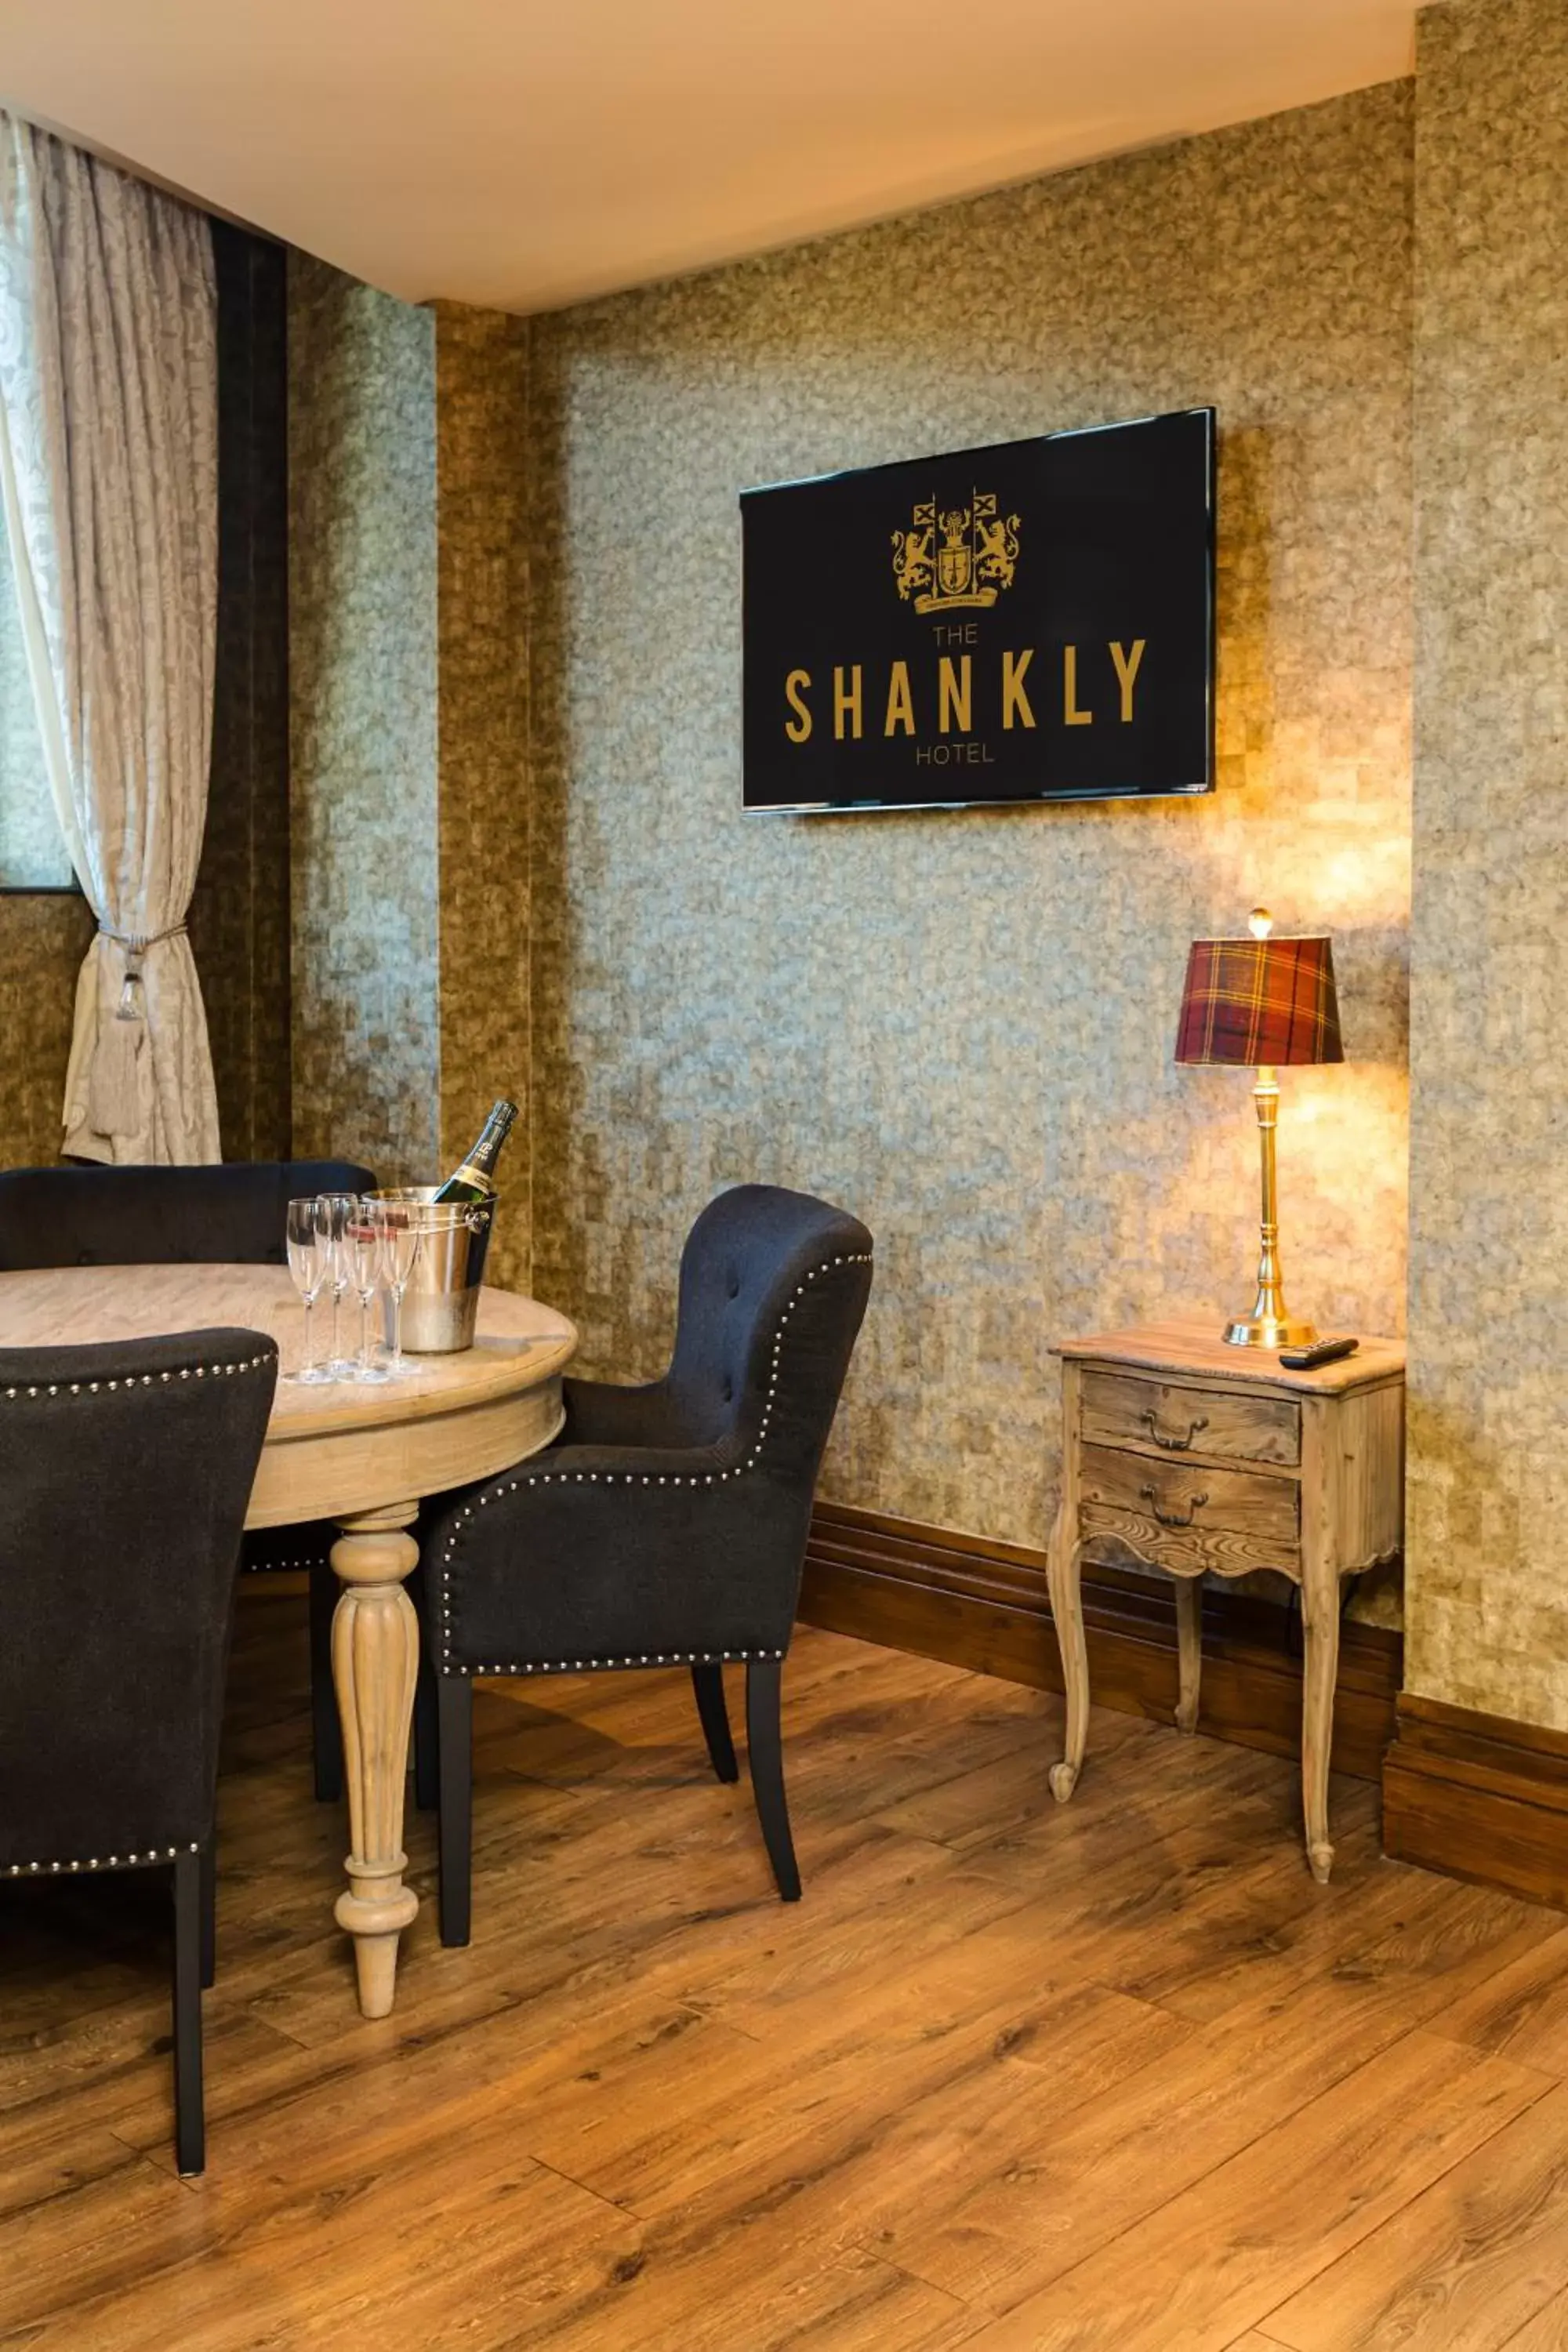 Property logo or sign in The Shankly Hotel